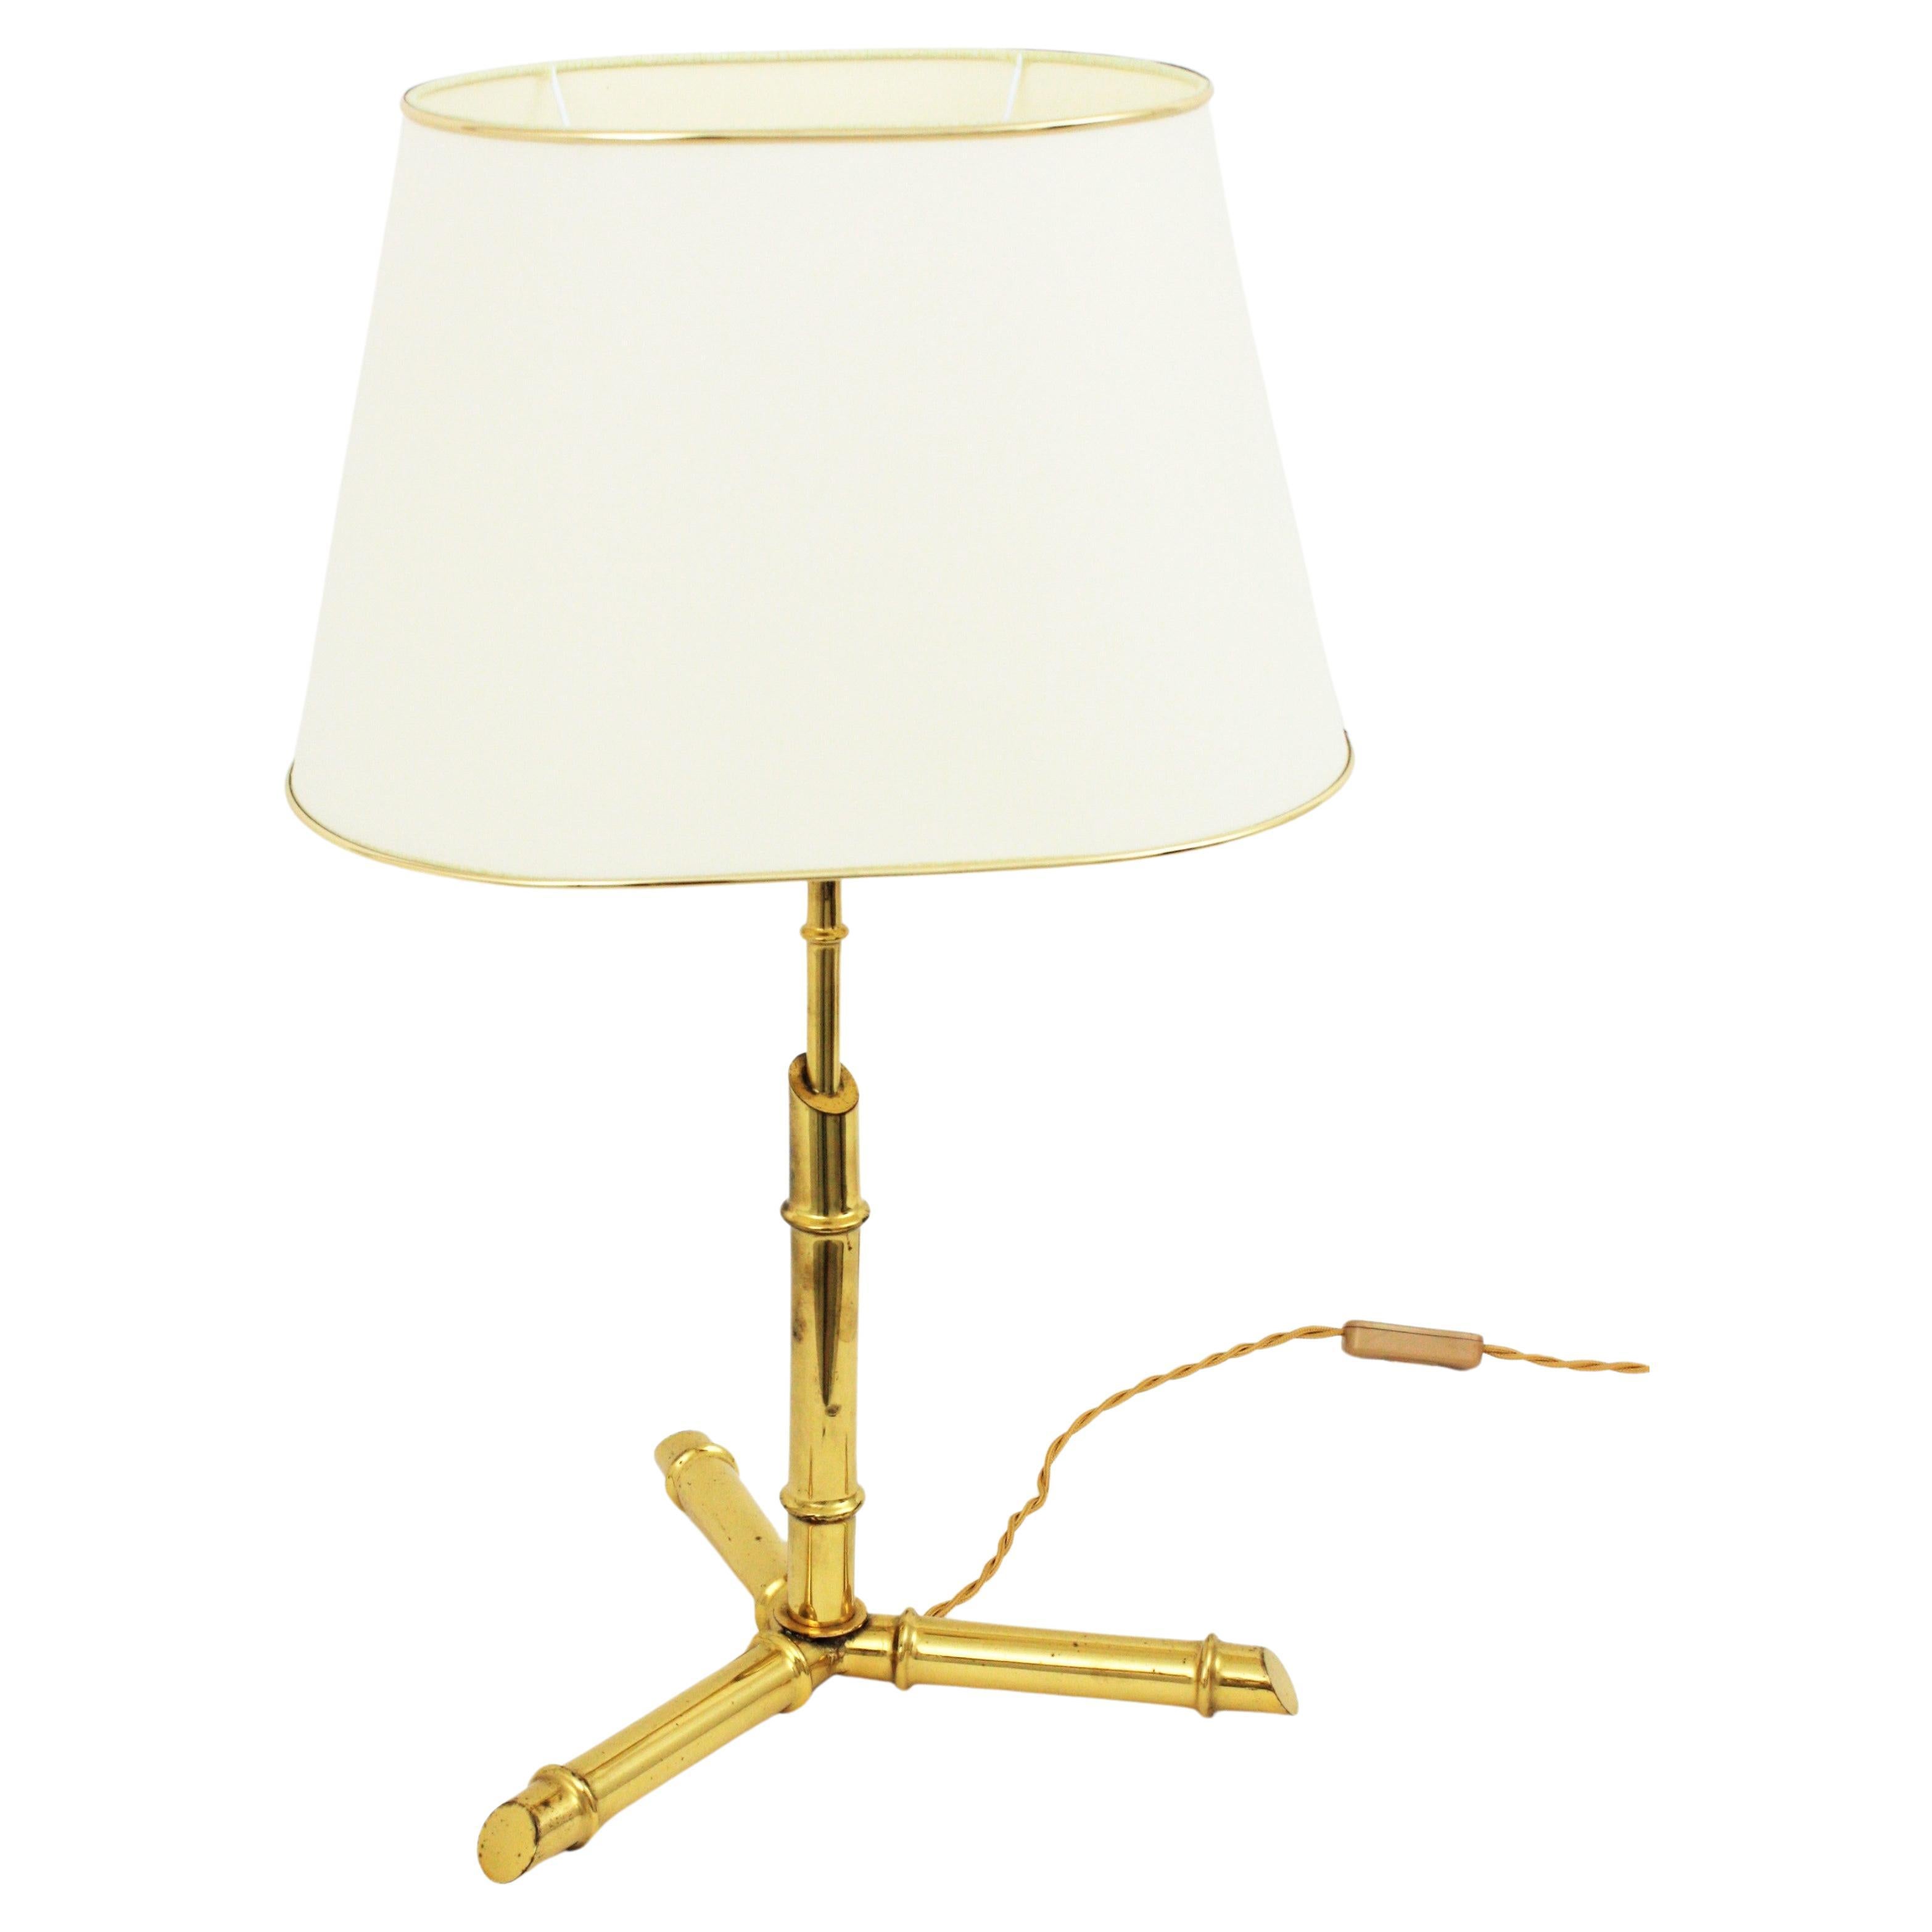 Italian Faux Bamboo Tripod Table Lamp in Brass, 1970s For Sale